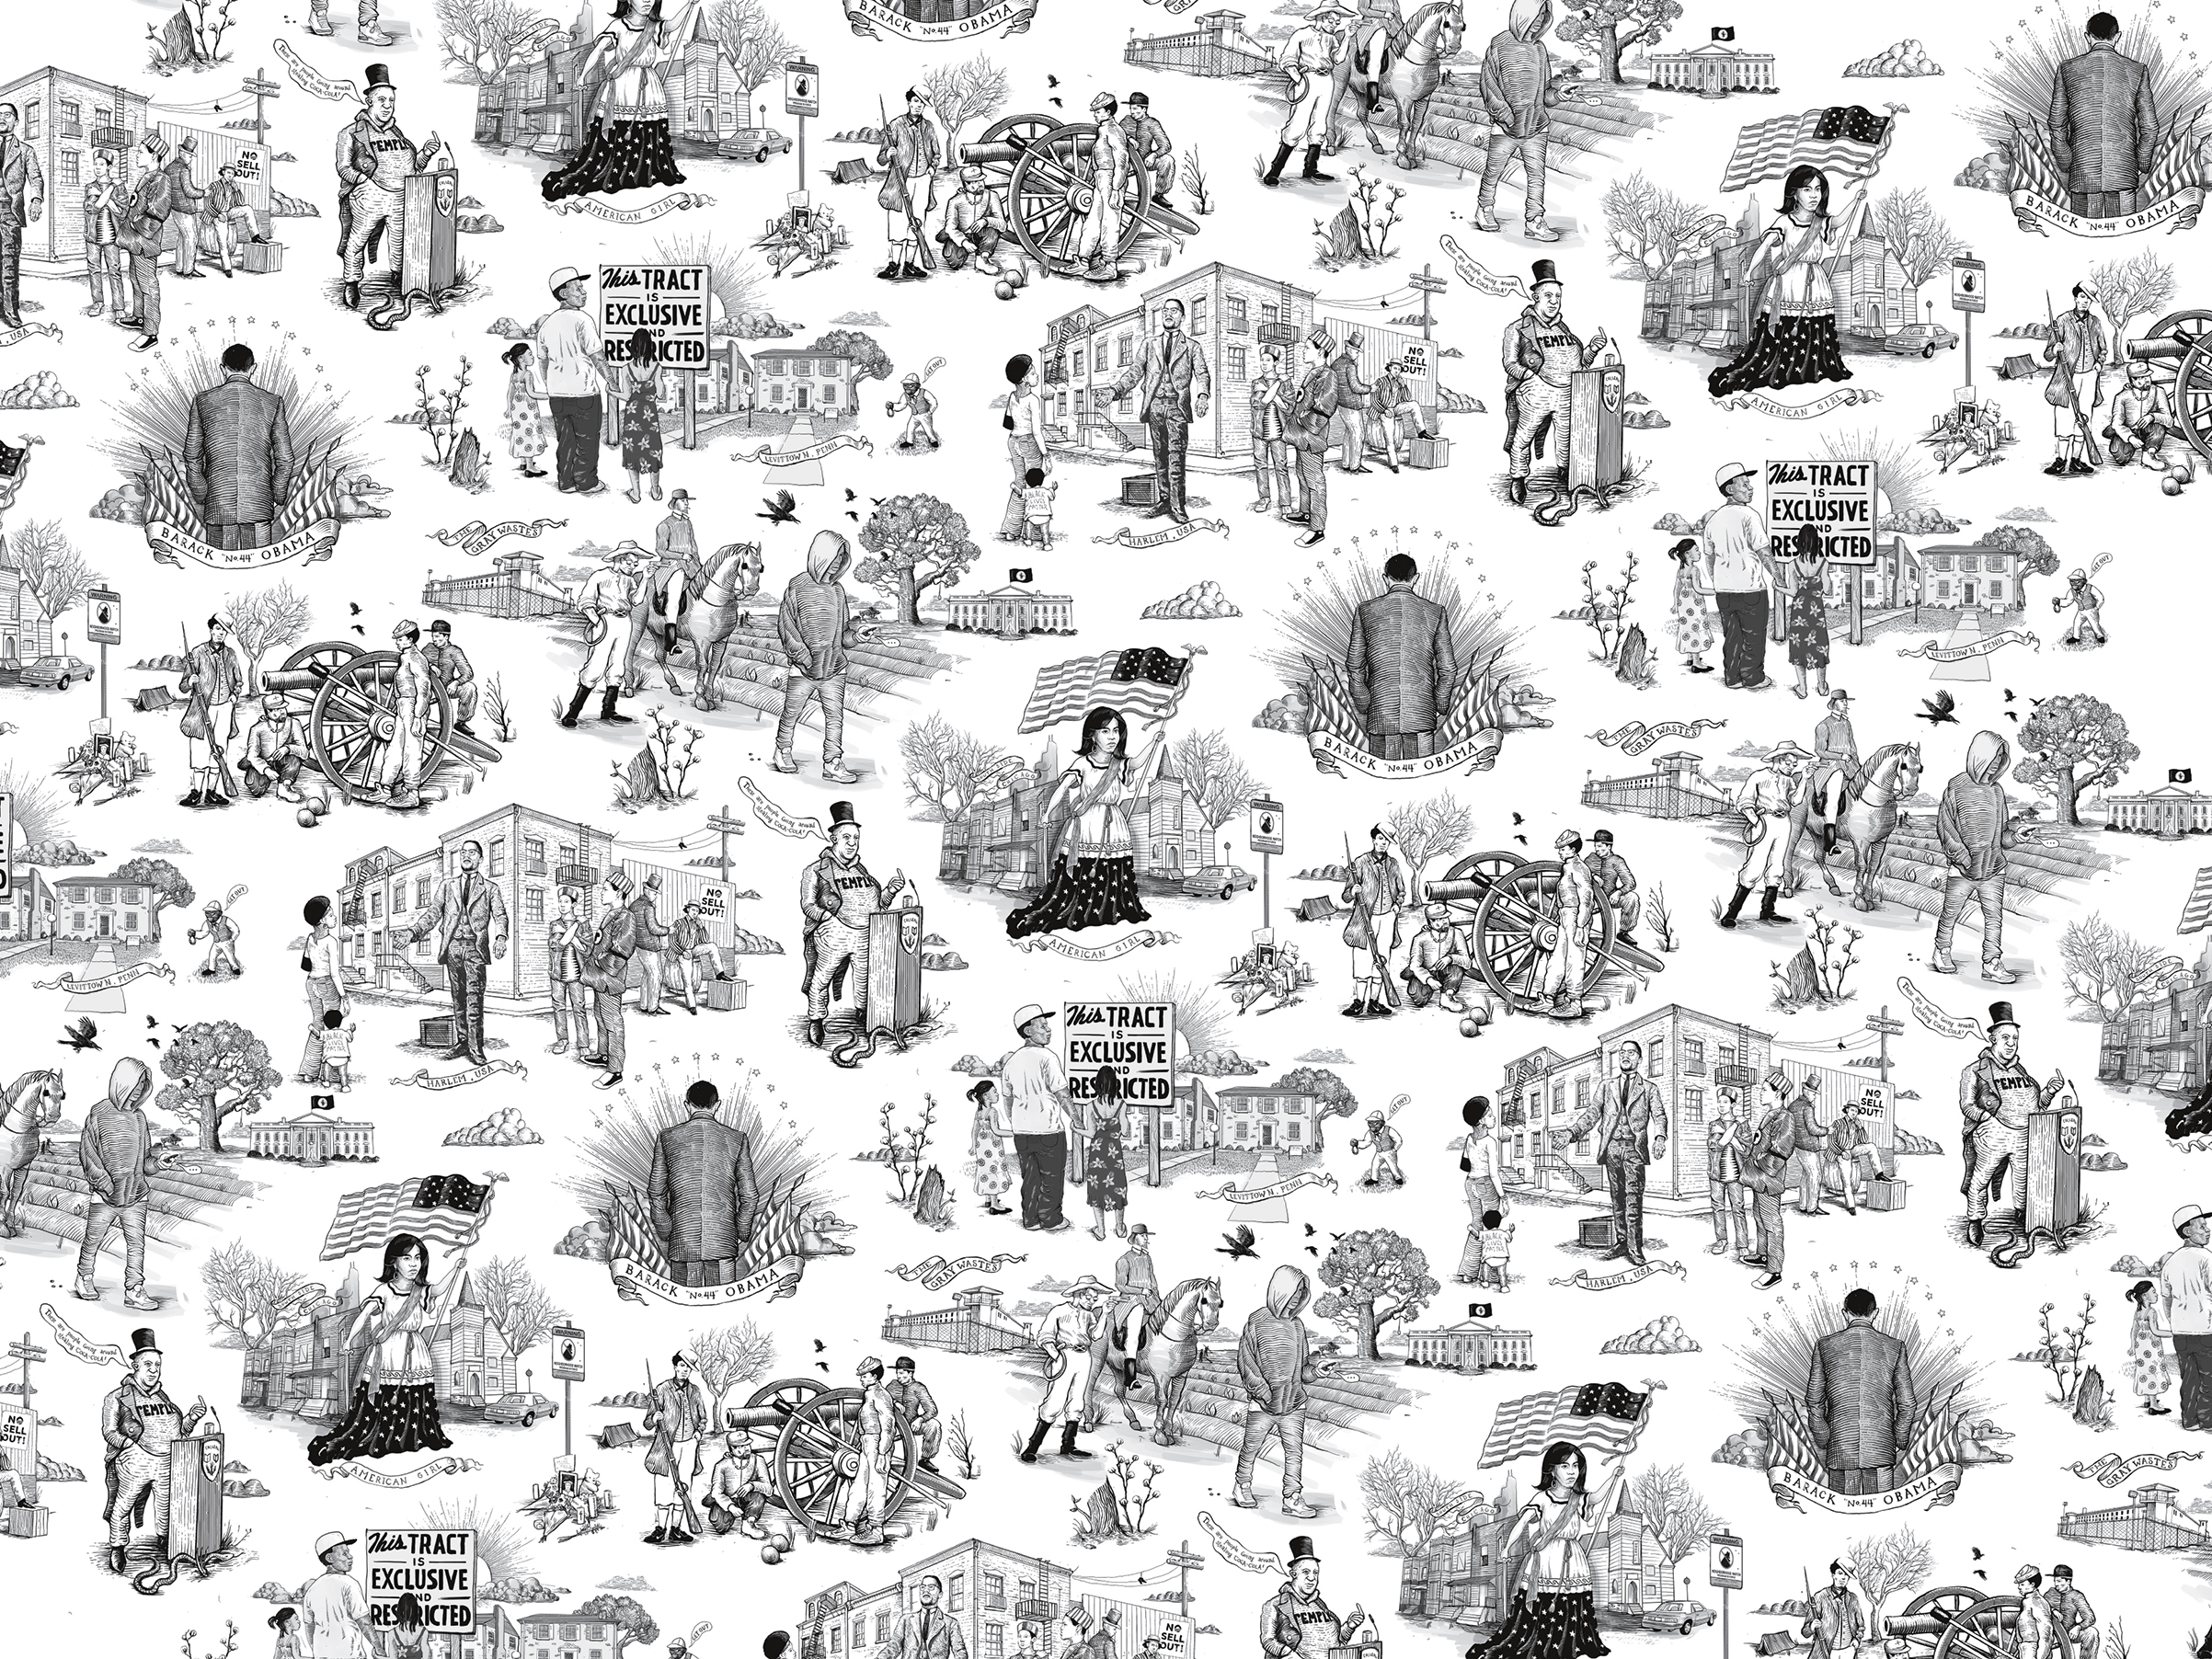 Illustrations on the book’s endpapers represent each of Coates’ essays (Dan Funderburgh)